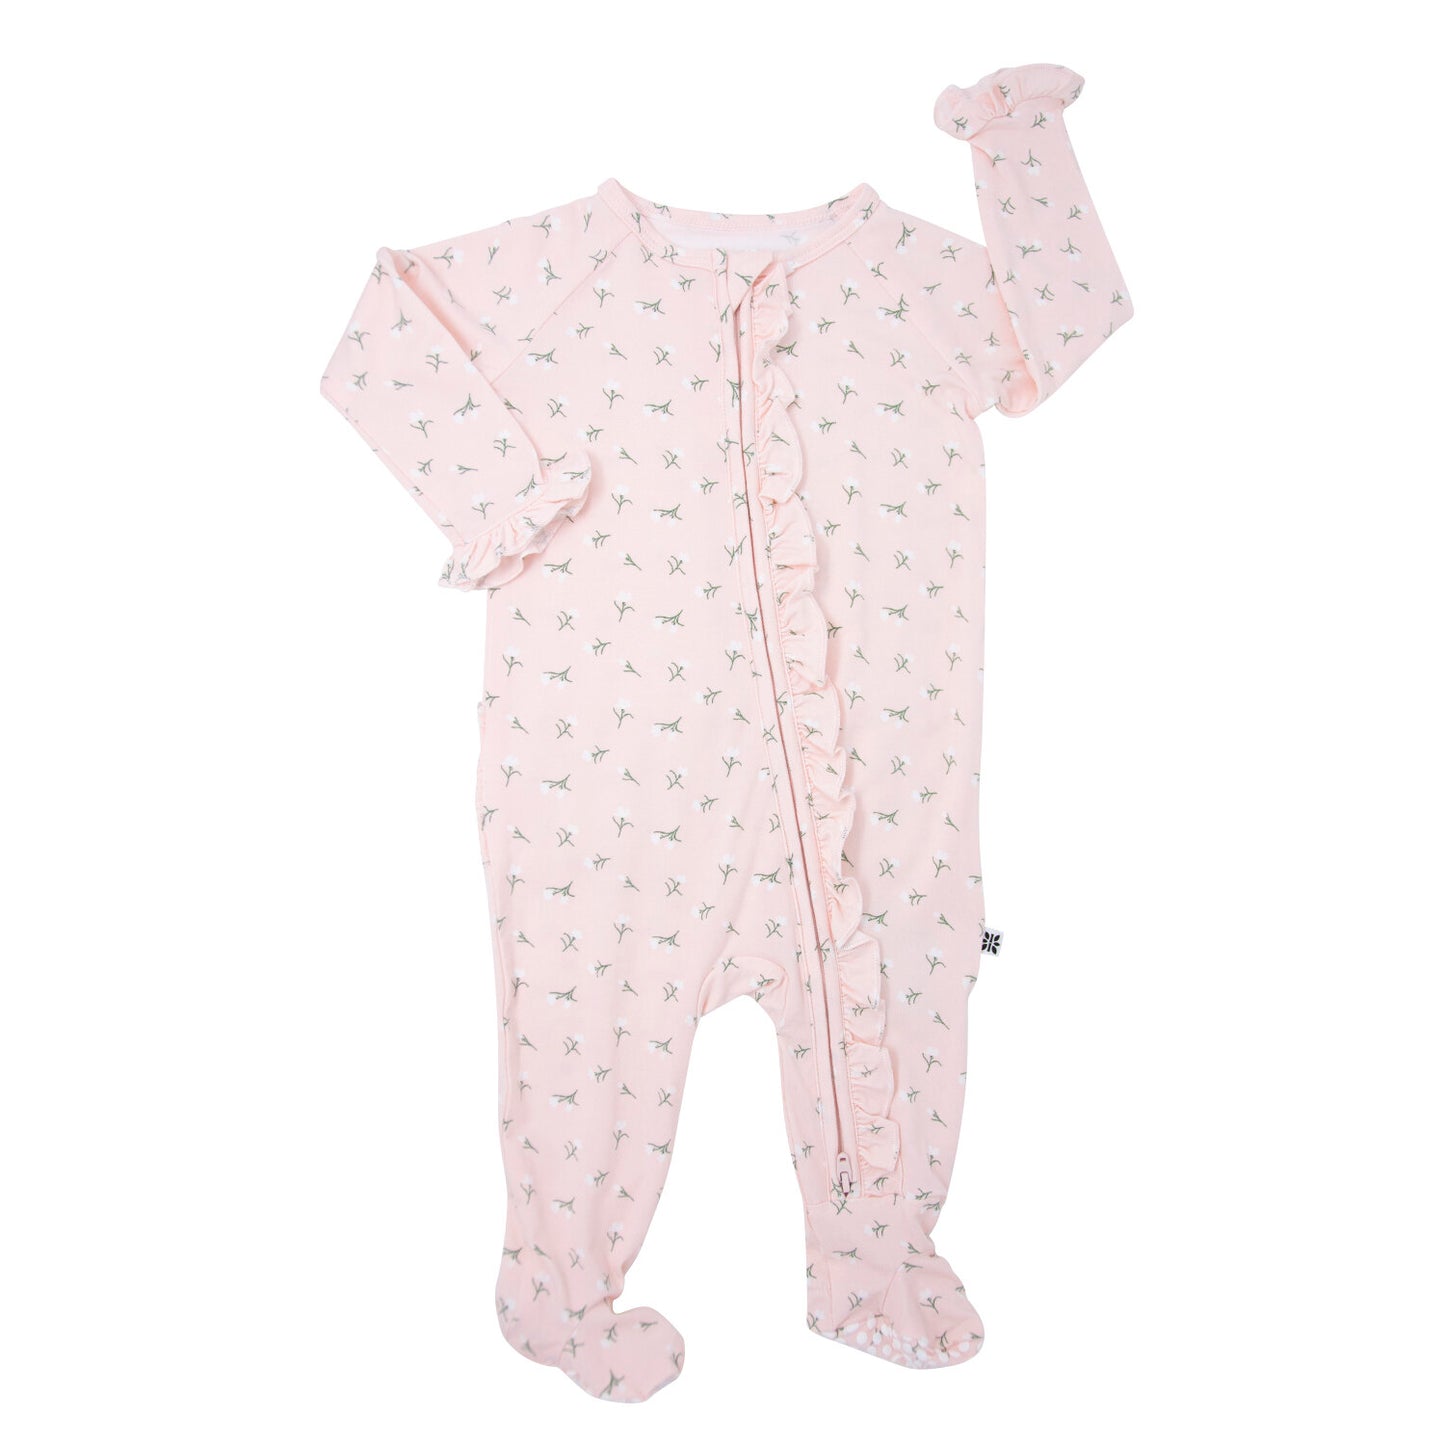 Baby's Breath Bamboo Ruffle Footie. All day comfort with a bit of style. 2-way zipper footie made with yummy, hypoallergenic, silky-smooth bamboo fabric and topped off with no-slip grips on the foot pads to ensure your little one stays stable and they grow.  Tagless size label for total comfort. Safe for sensitive skin.  95% Bamboo Viscose, 5% Spandex. Machine Washable and Dryable!